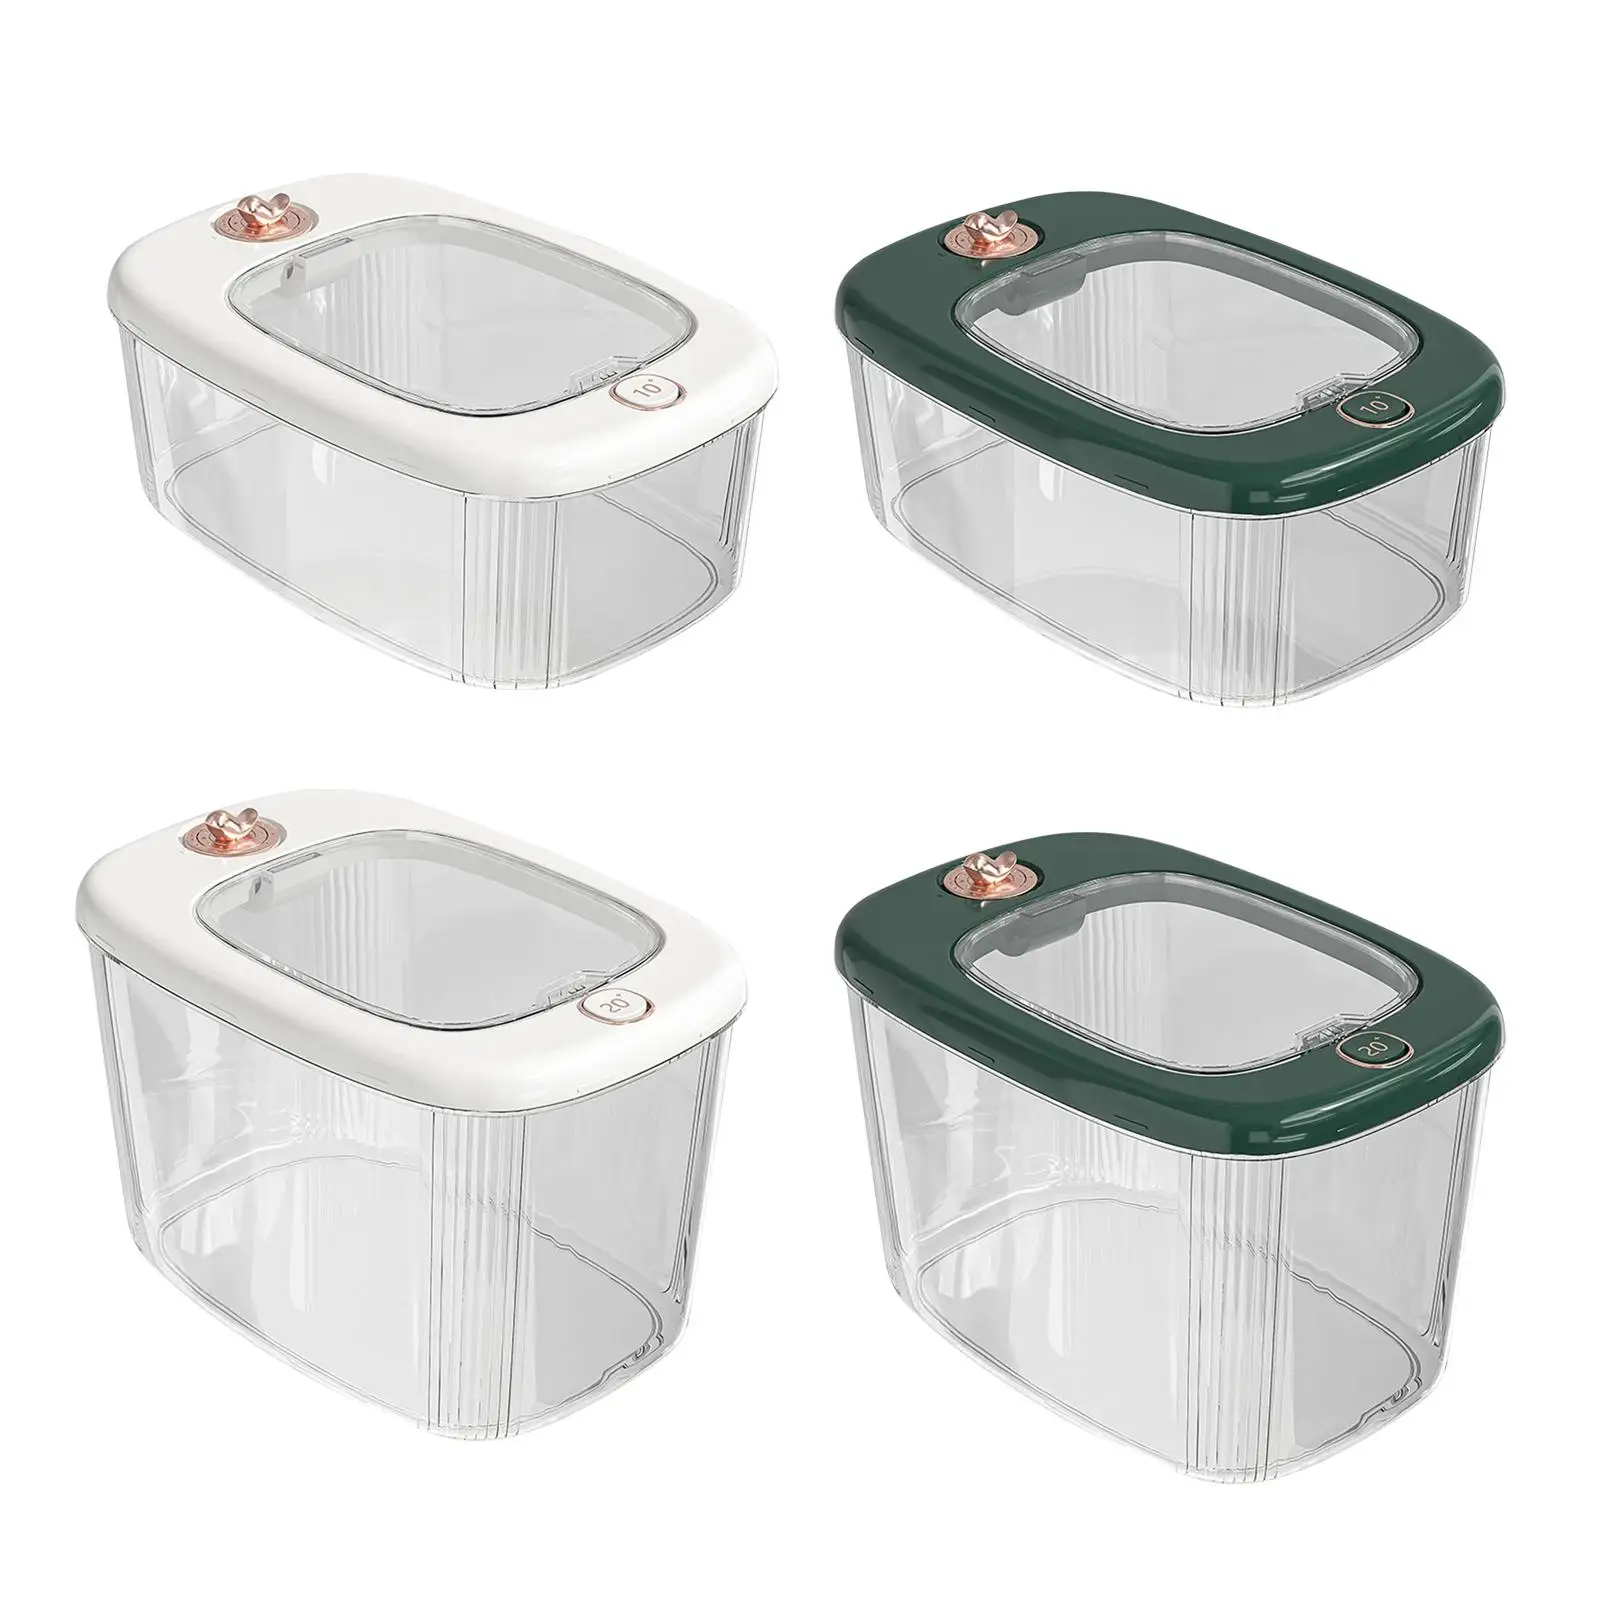 Sealed Rice Box Multifunctional Large Capacity push button Clear Food Storage Canister for Dried Fruits Rice cereal